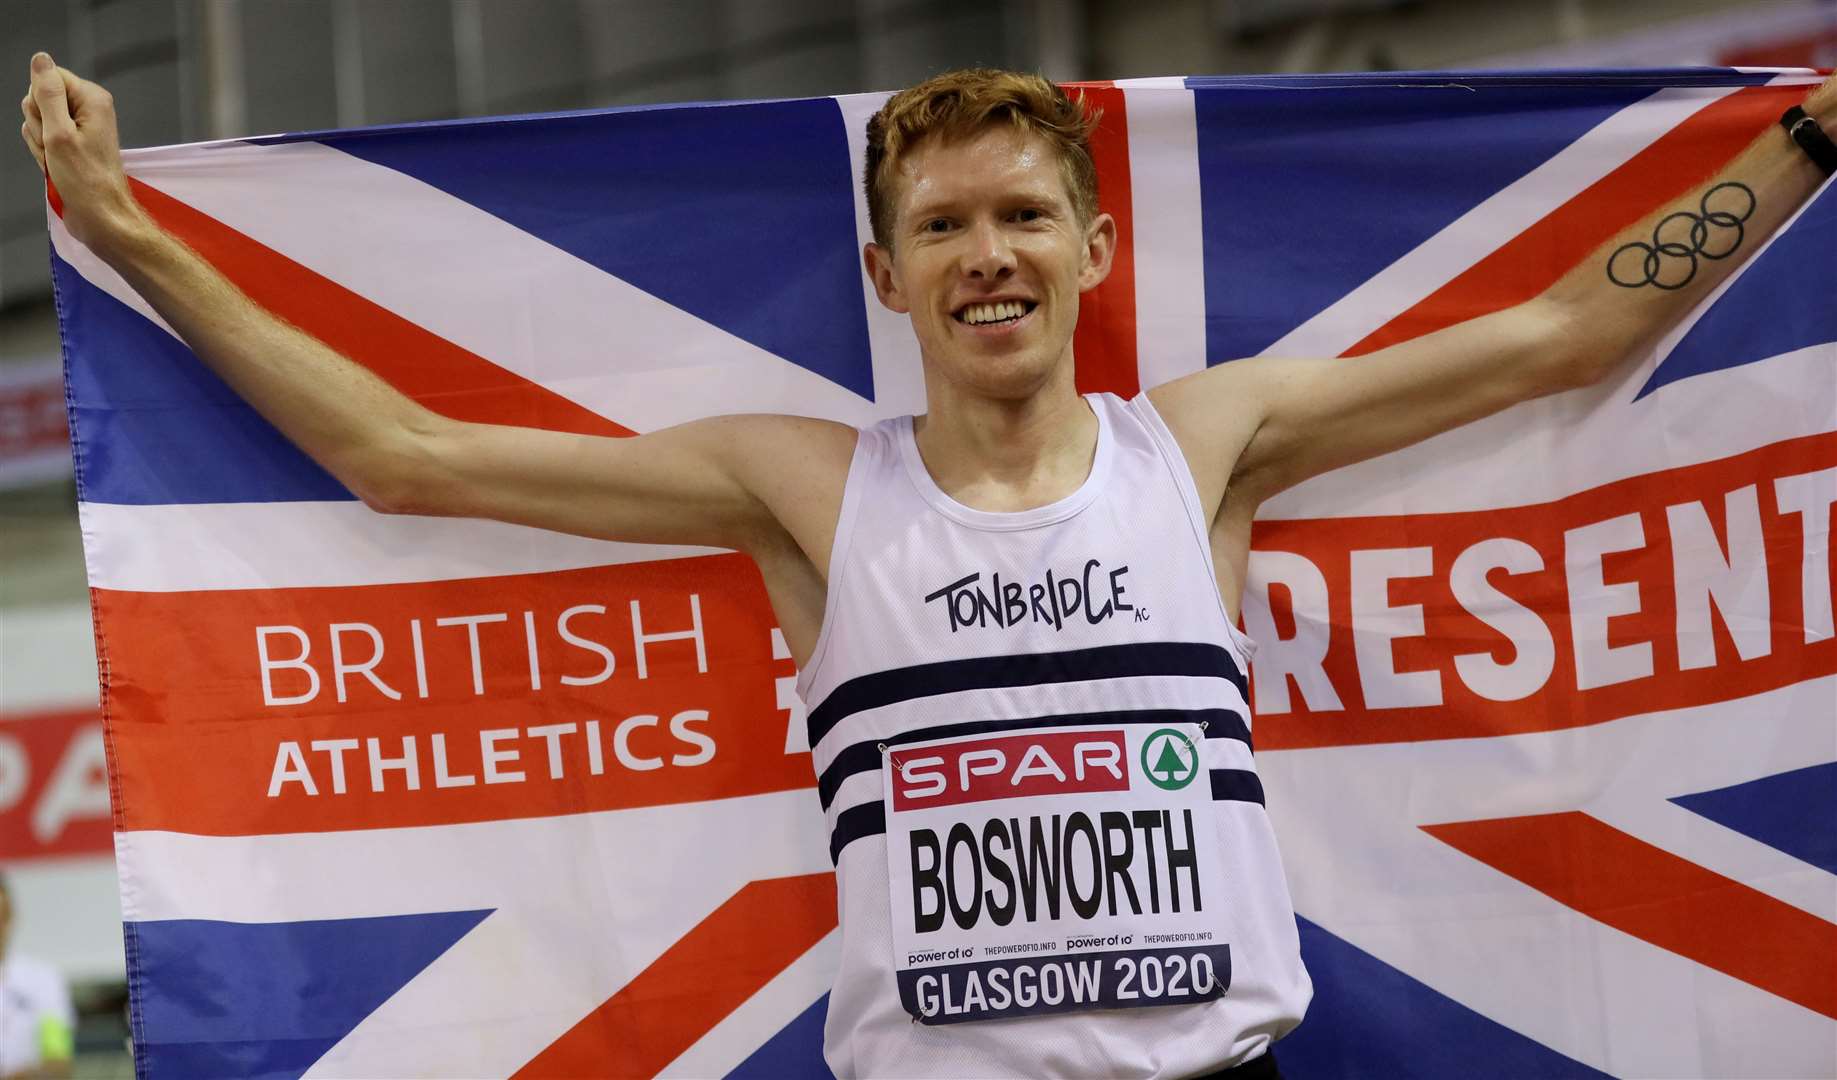 Tom Bosworth celebrates winning the 5km walk at the British Athletics Indoor Championships in 2020. Picture: Reuters/Russell Cheyne